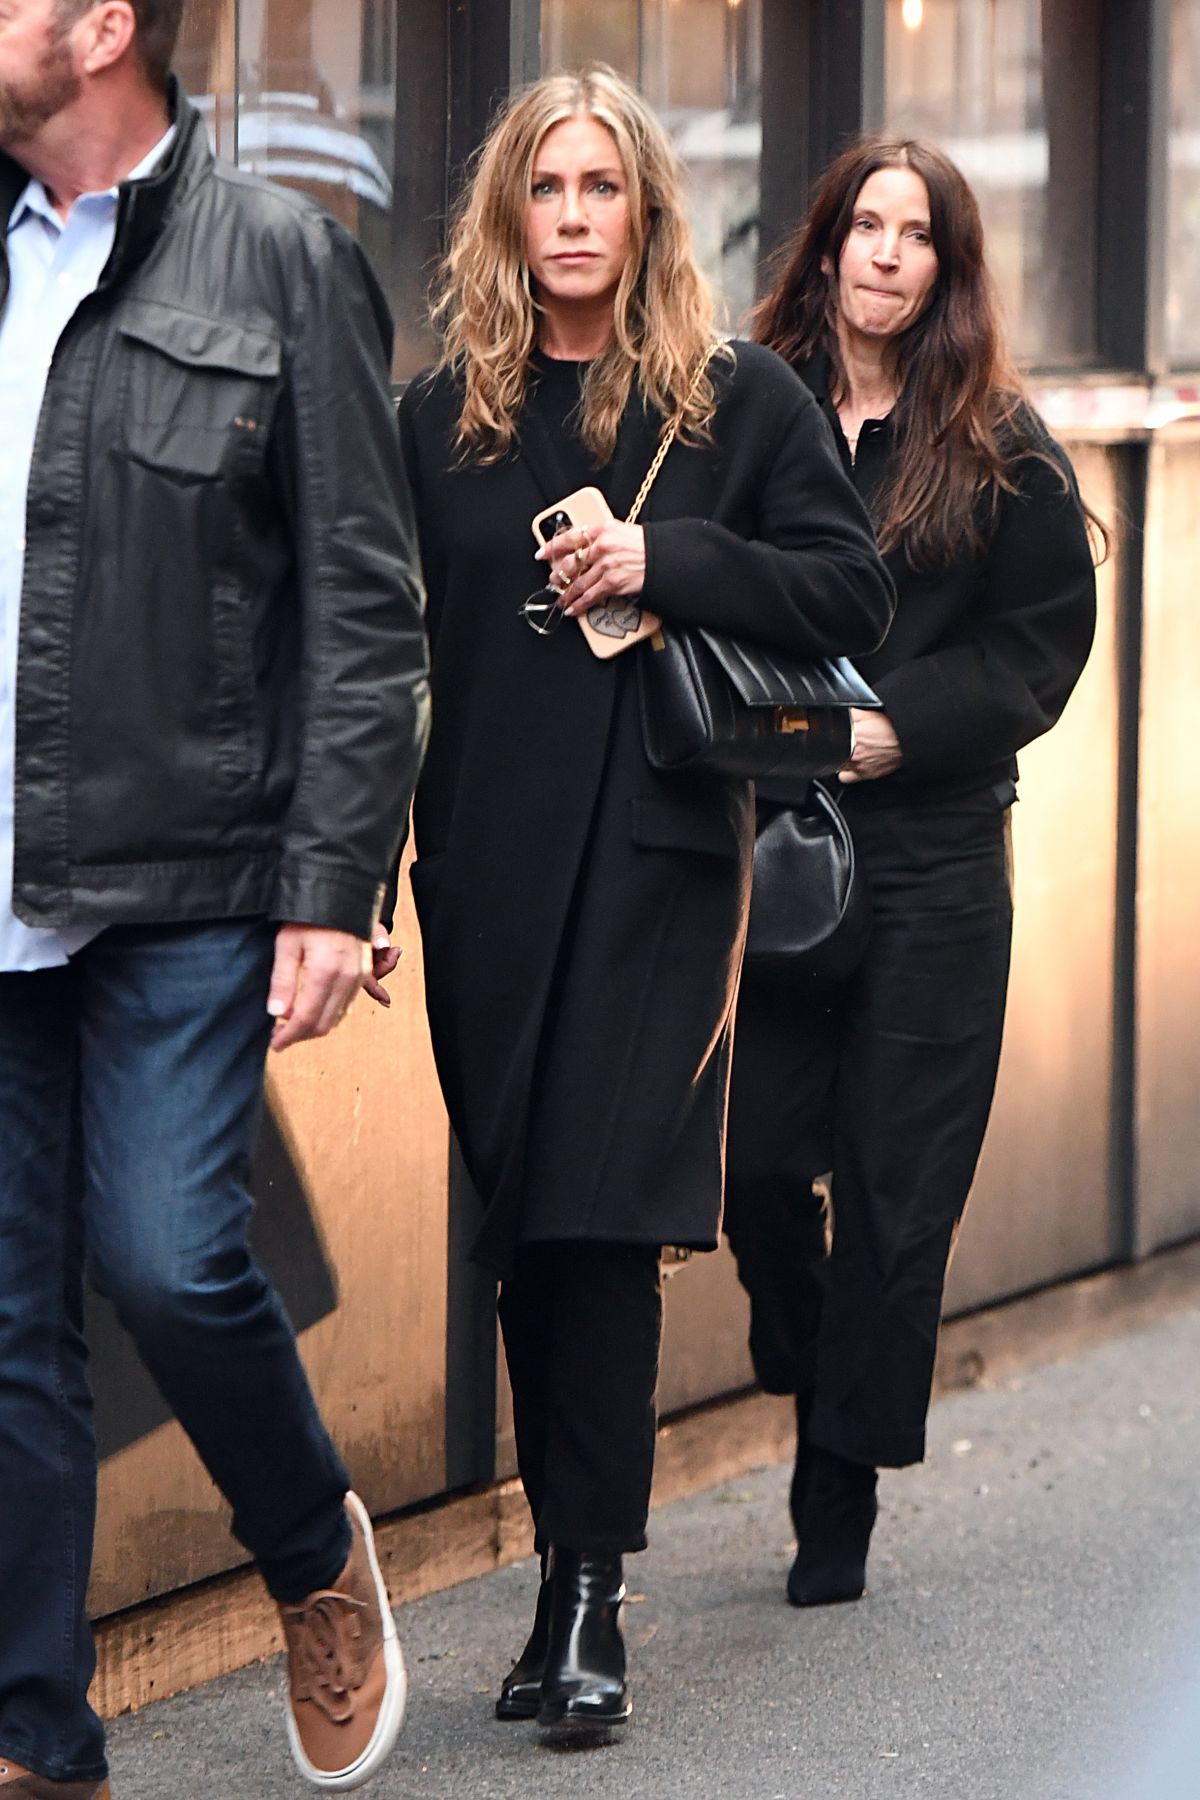 https://www.hawtcelebs.com/wp-content/uploads/2023/04/jennifer-aniston-and-justin-theroux-out-for-dinner-with-friends-in-new-york-04-22-2023-4.jpg